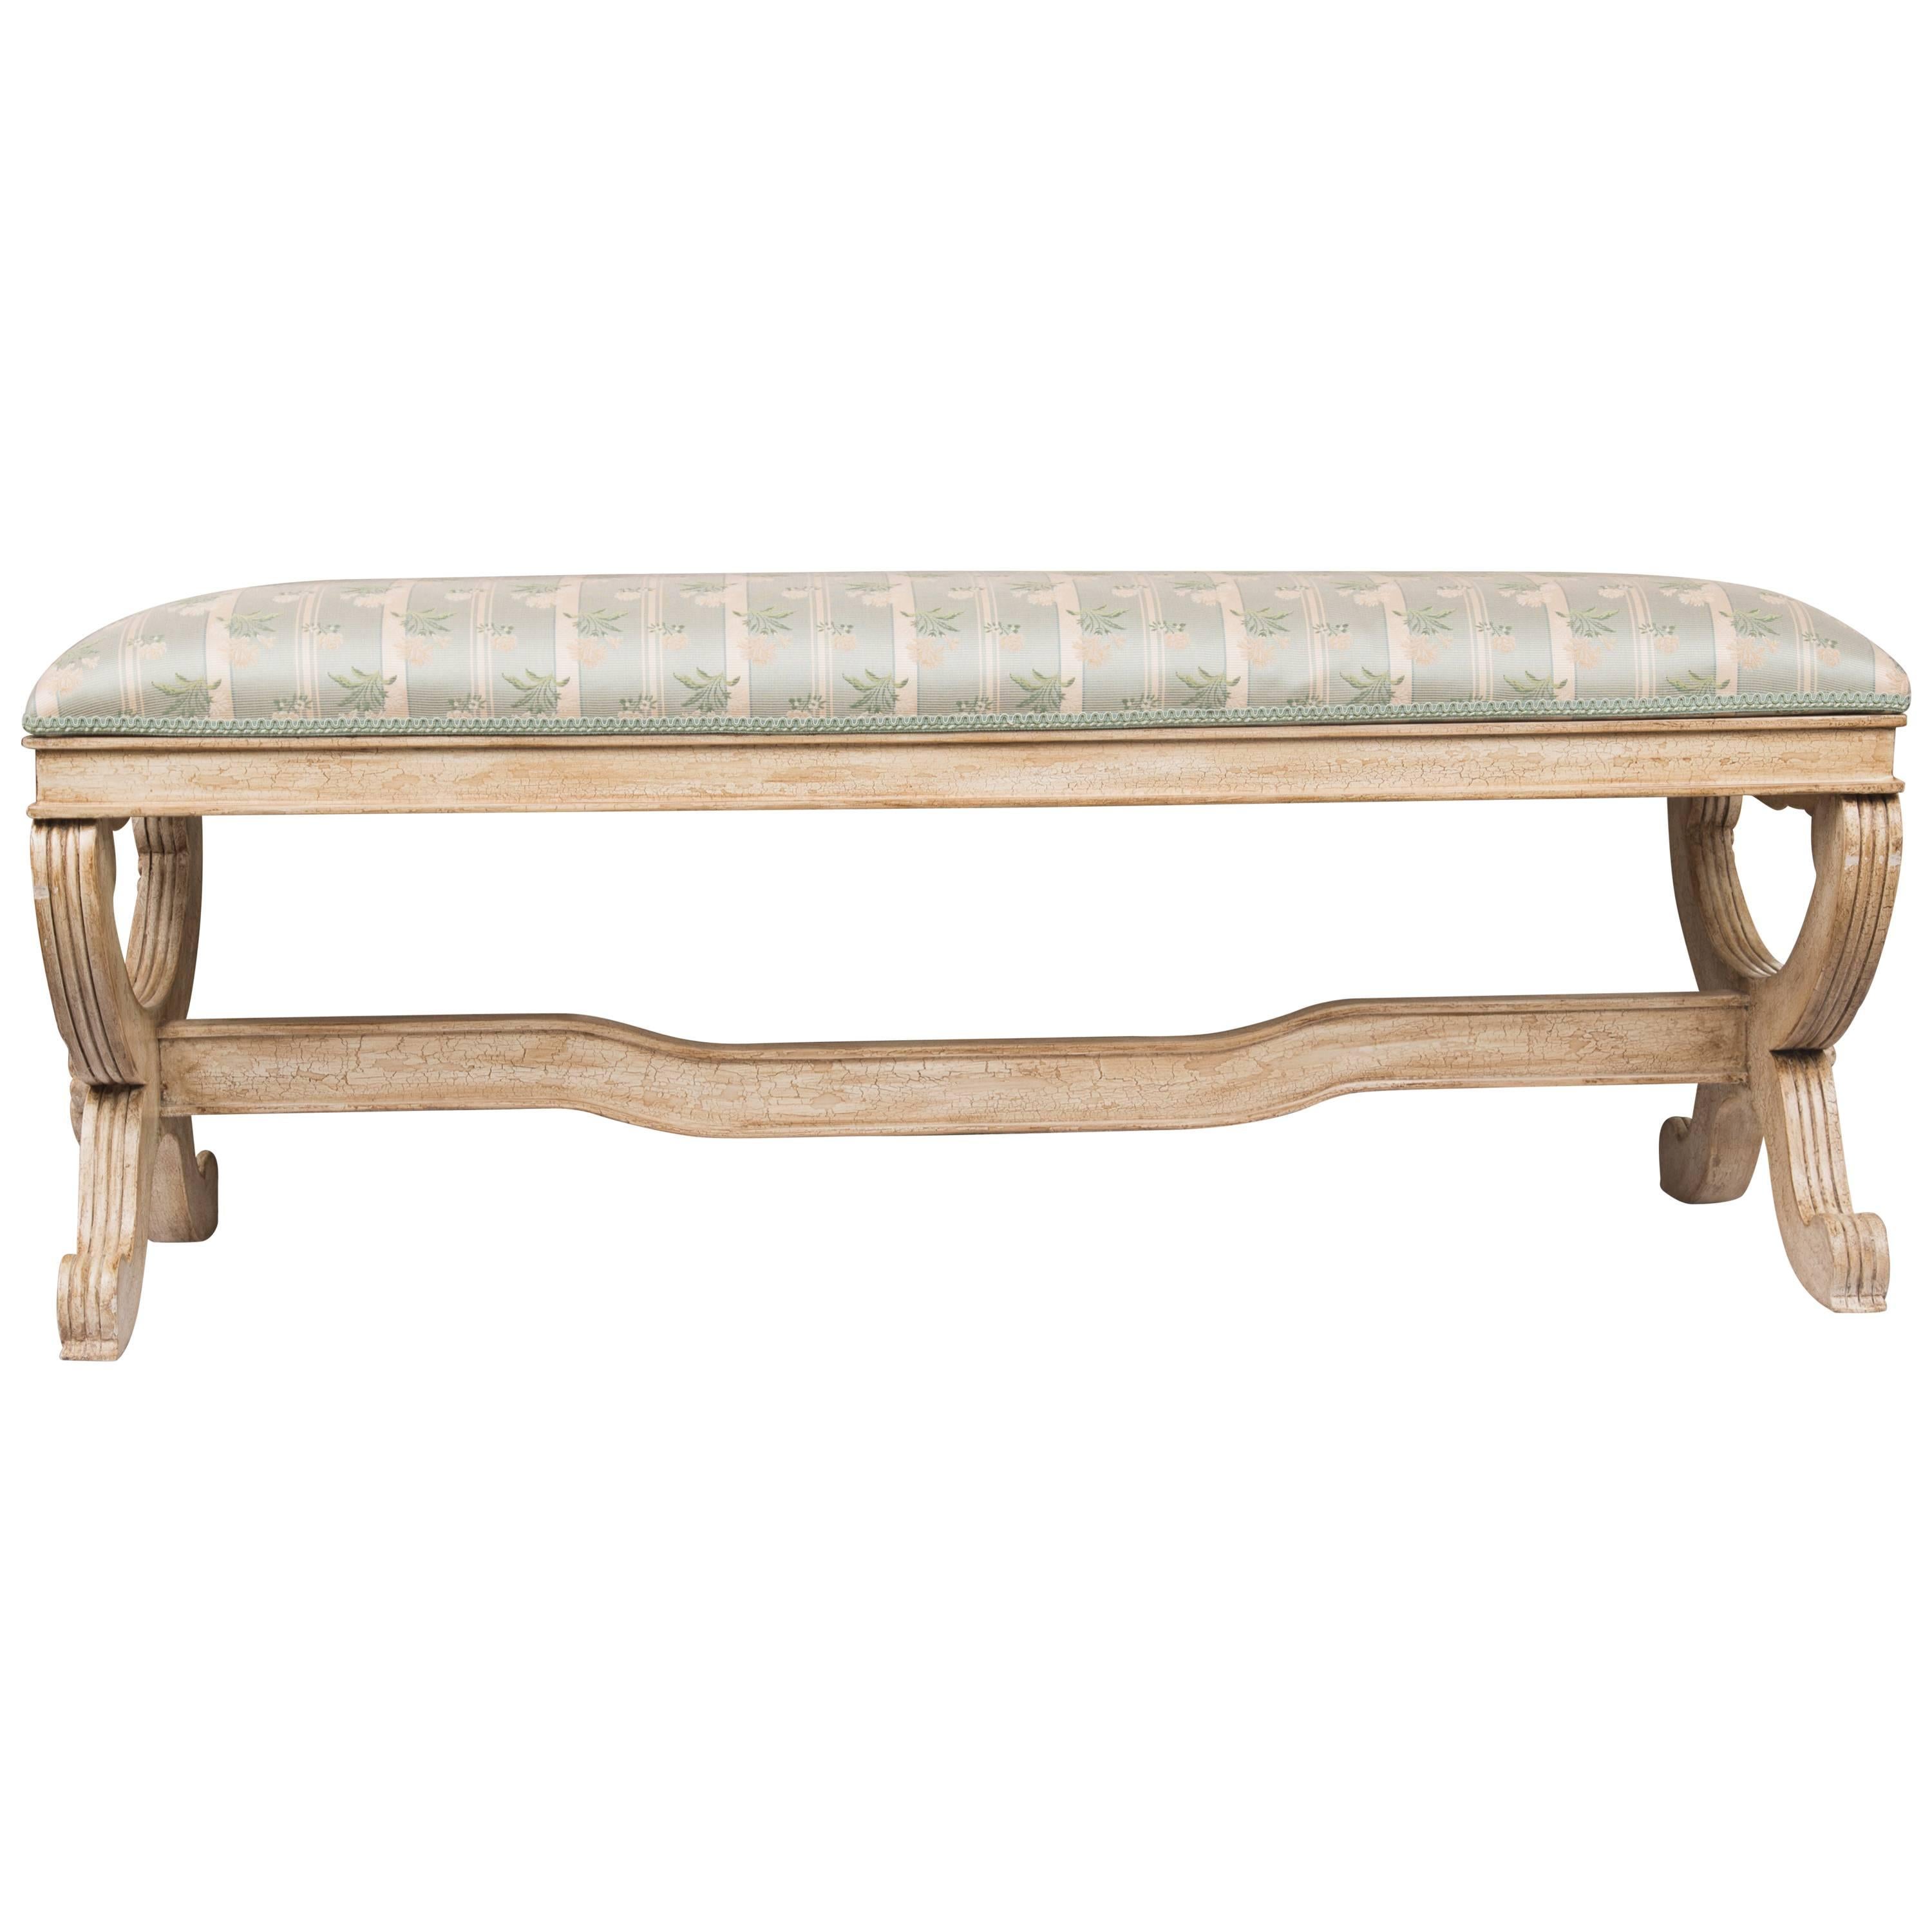 Painted and Upholstered Rectangular Bench